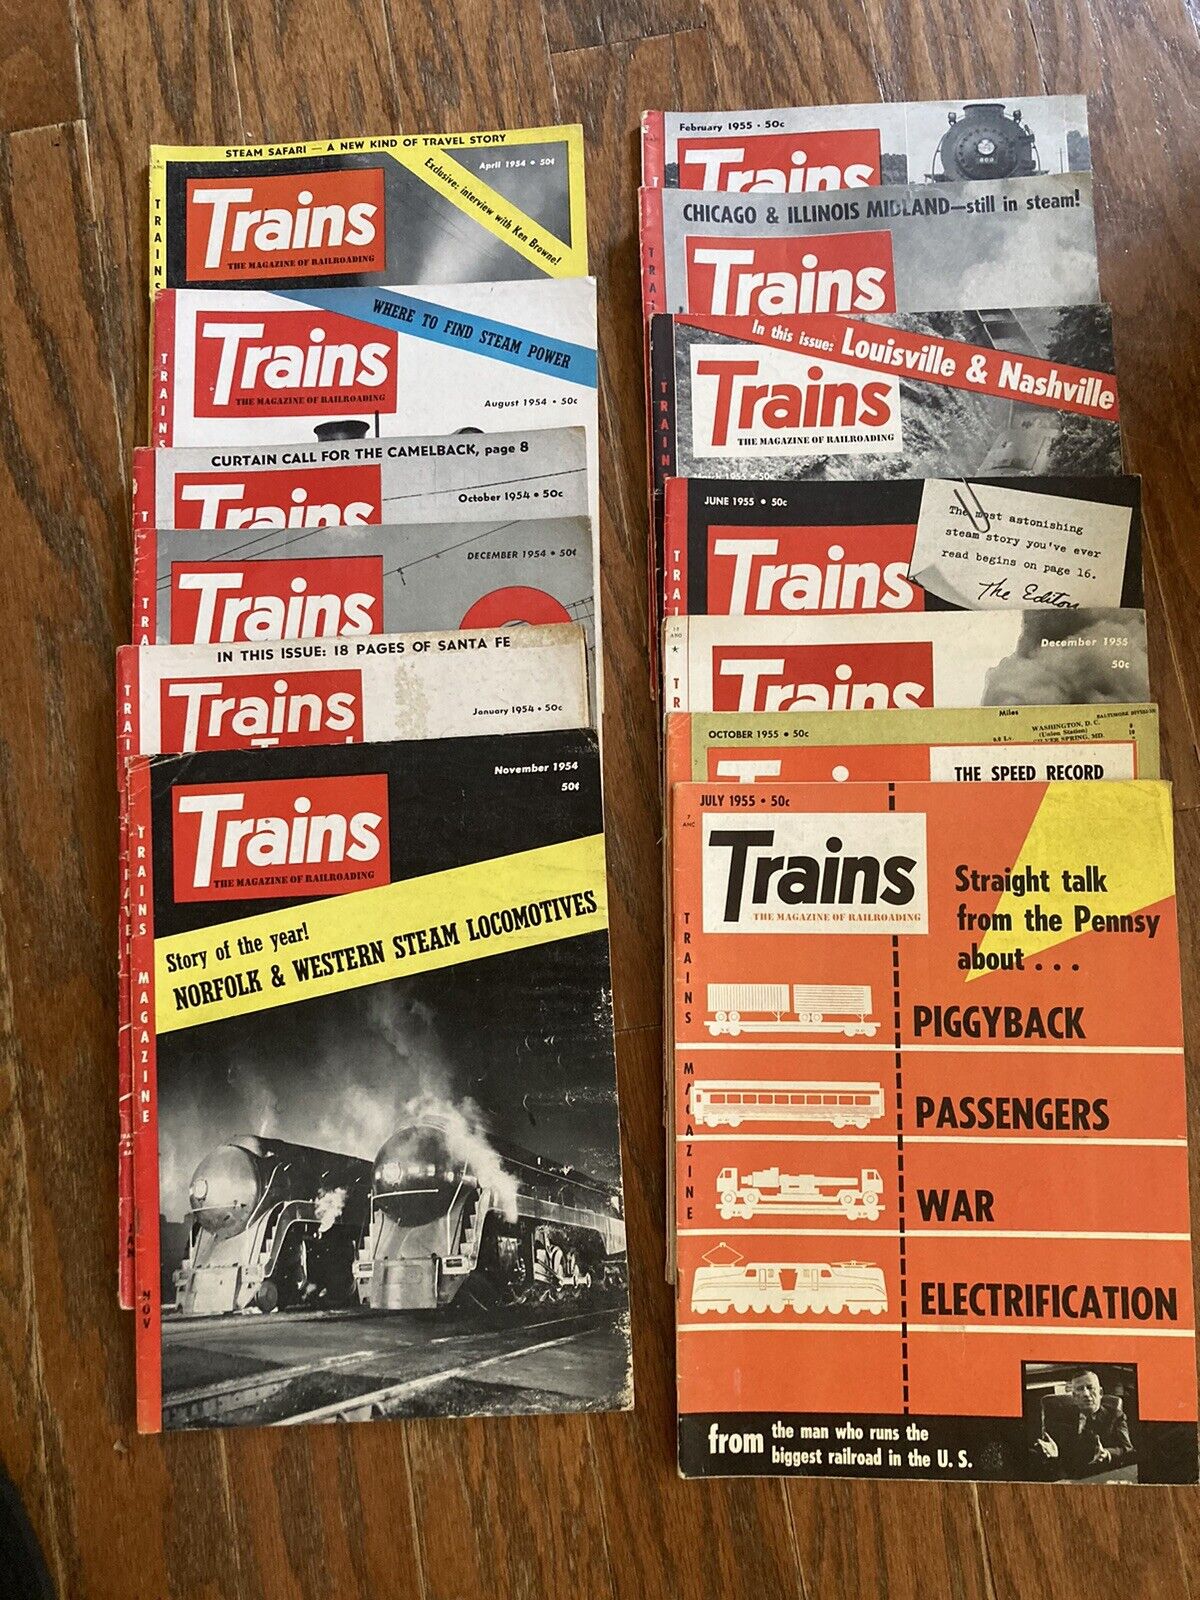 LOT OF VINTAGE “TRAIN”  MAGAZINES -1954-1955 ISSUES